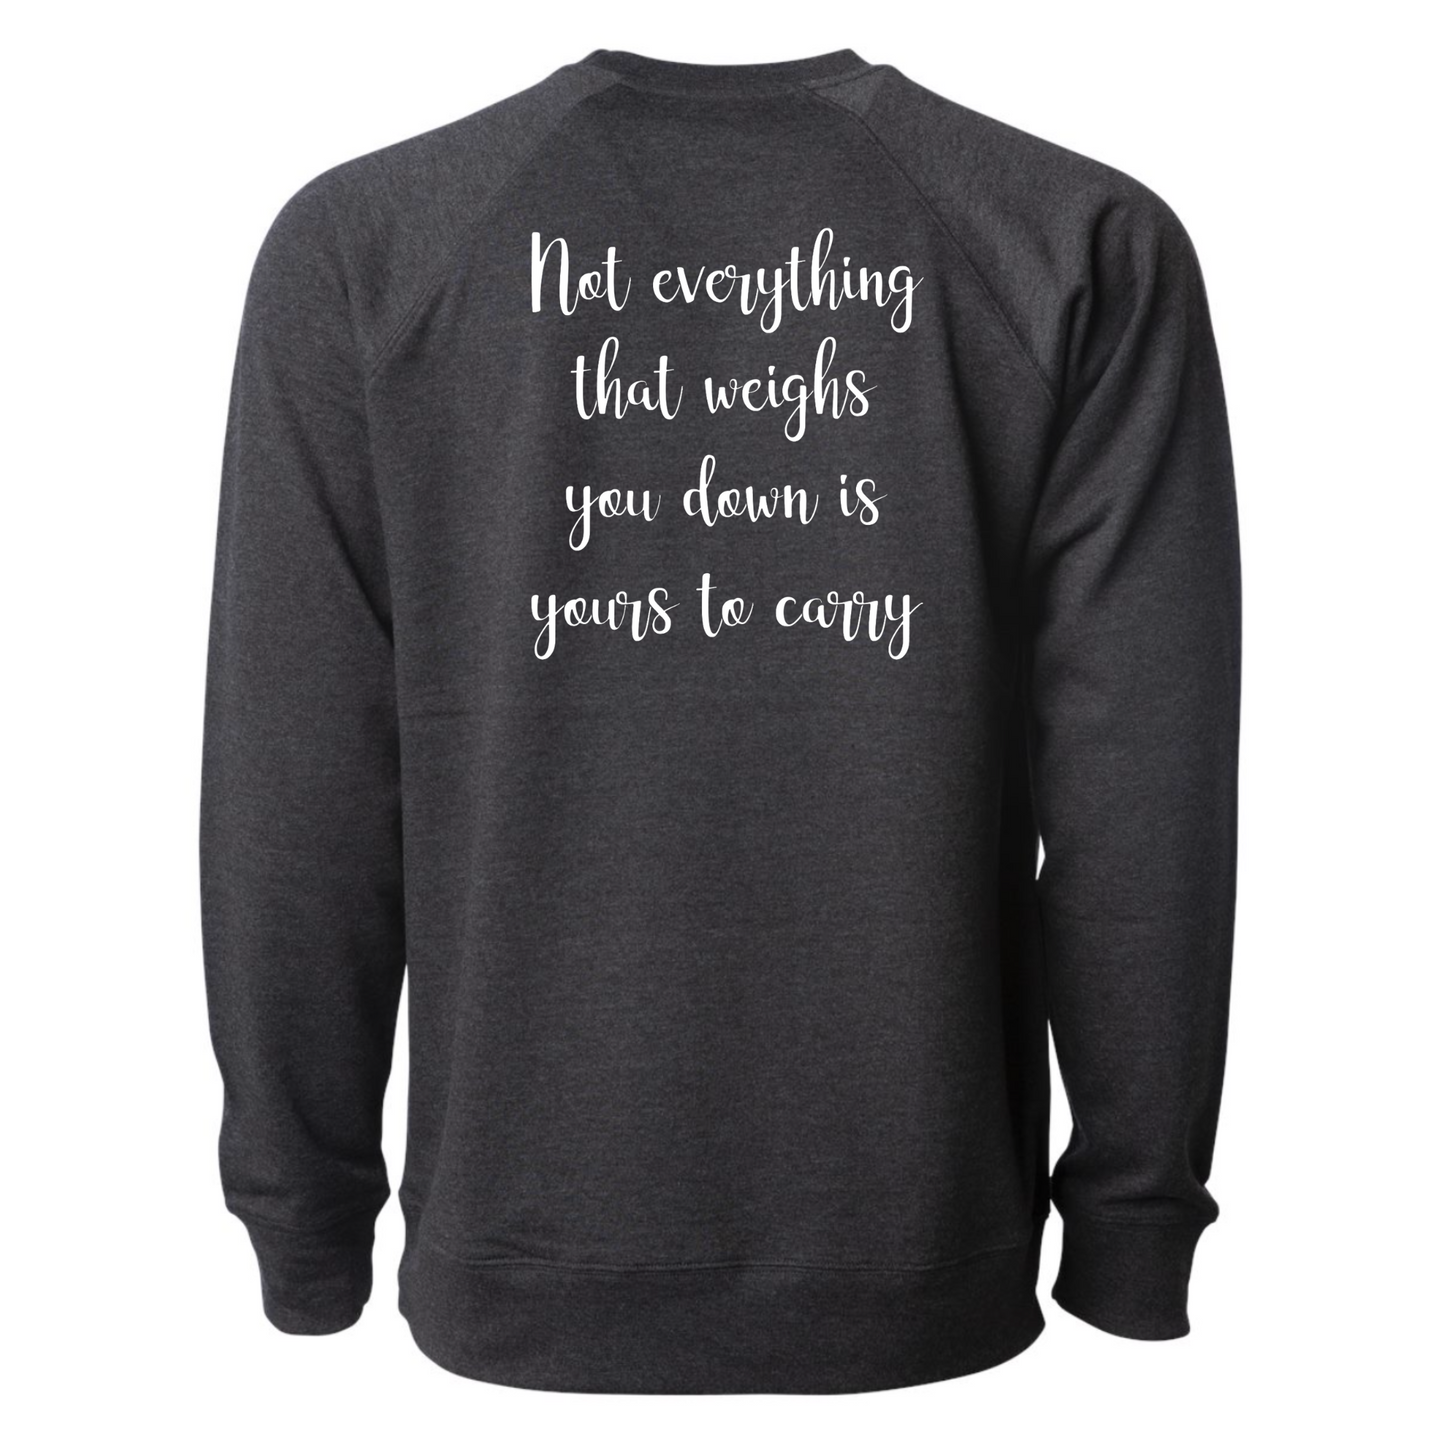 Not Everything That Weighs You Down - Pull Over Sweatshirt in charcoal gray. The back has a white cursive saying of "not everything that weighs you down is yours to carry" with the front corner pocket saying in a cursive font in white of "keep smiling". This is the back view of the sweatshirt.